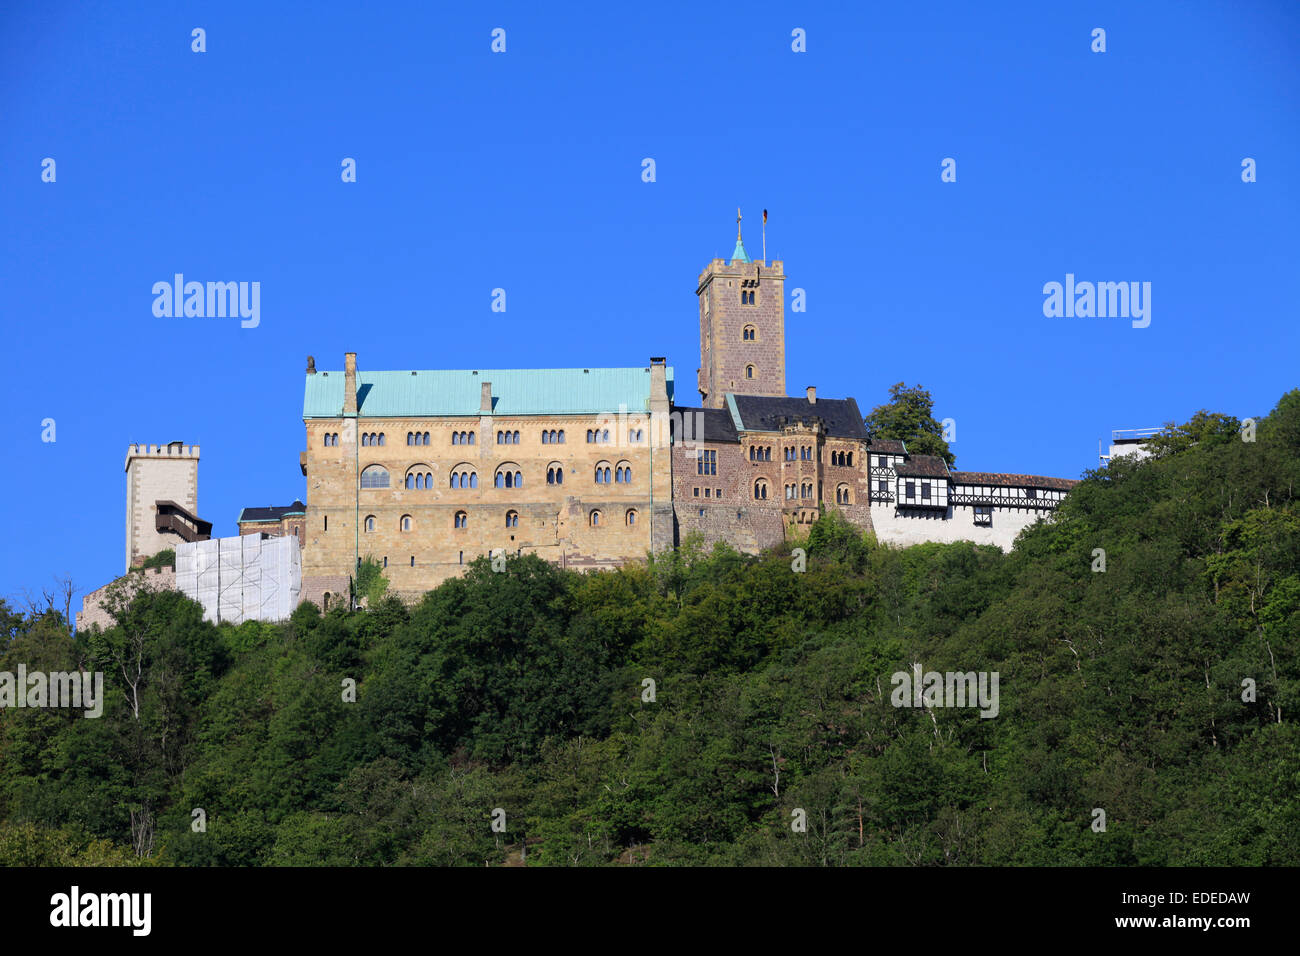 The Wartburg is a castle near Eisenach. It was founded in 1067 by Louis the Springer and belongs since 1999 as a World Heritage Site. Photo: Klaus Nowottnick Date: September 07, 2012 Stock Photo